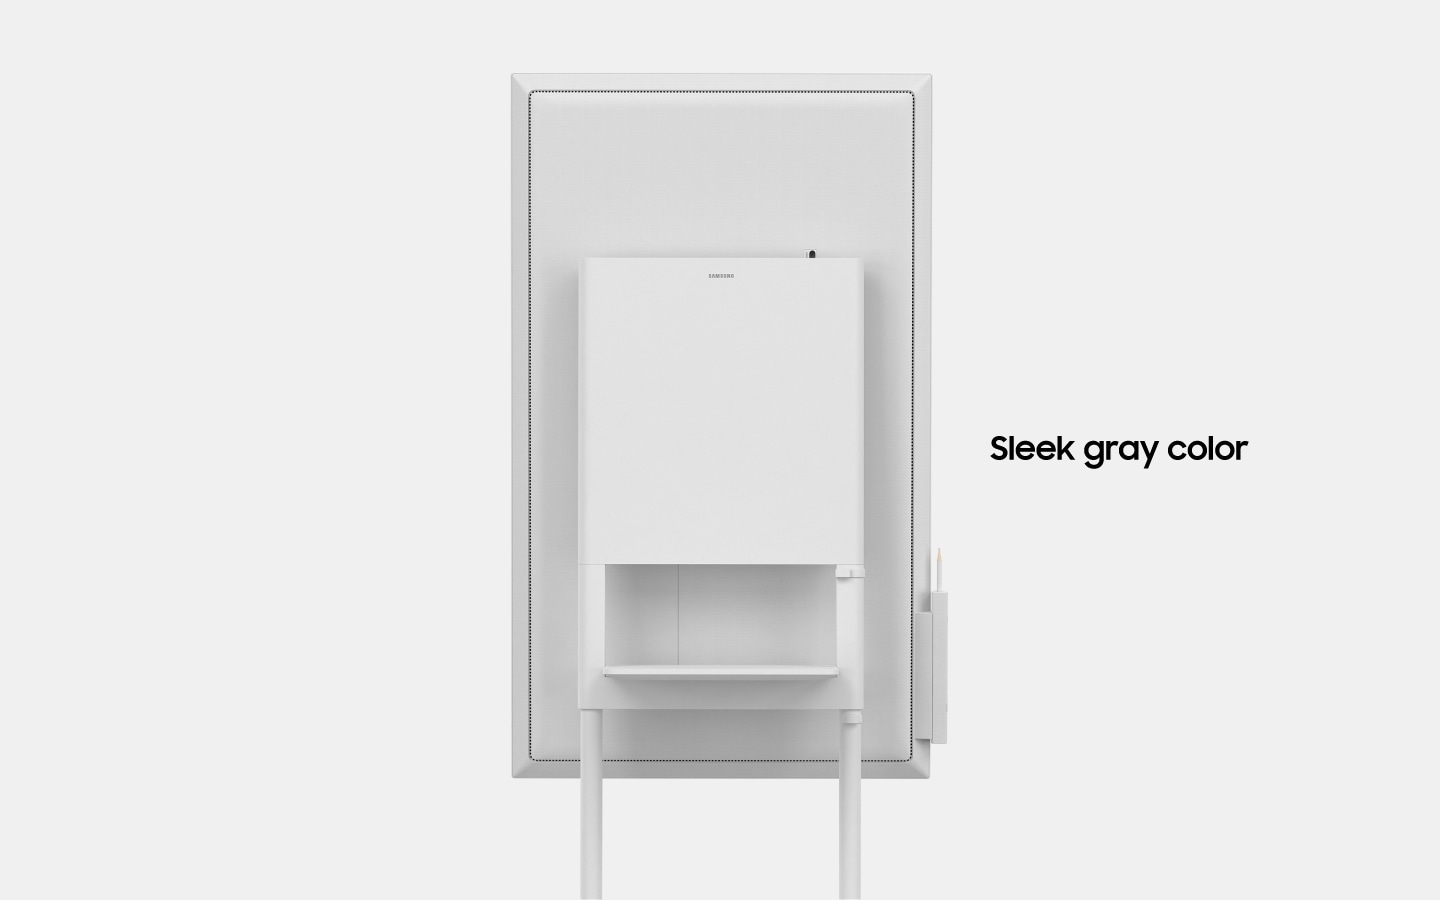 An image showing a Samsung Flip device rotating, to show the back of the device with text that reads "Sleek, gray color"(6-4).